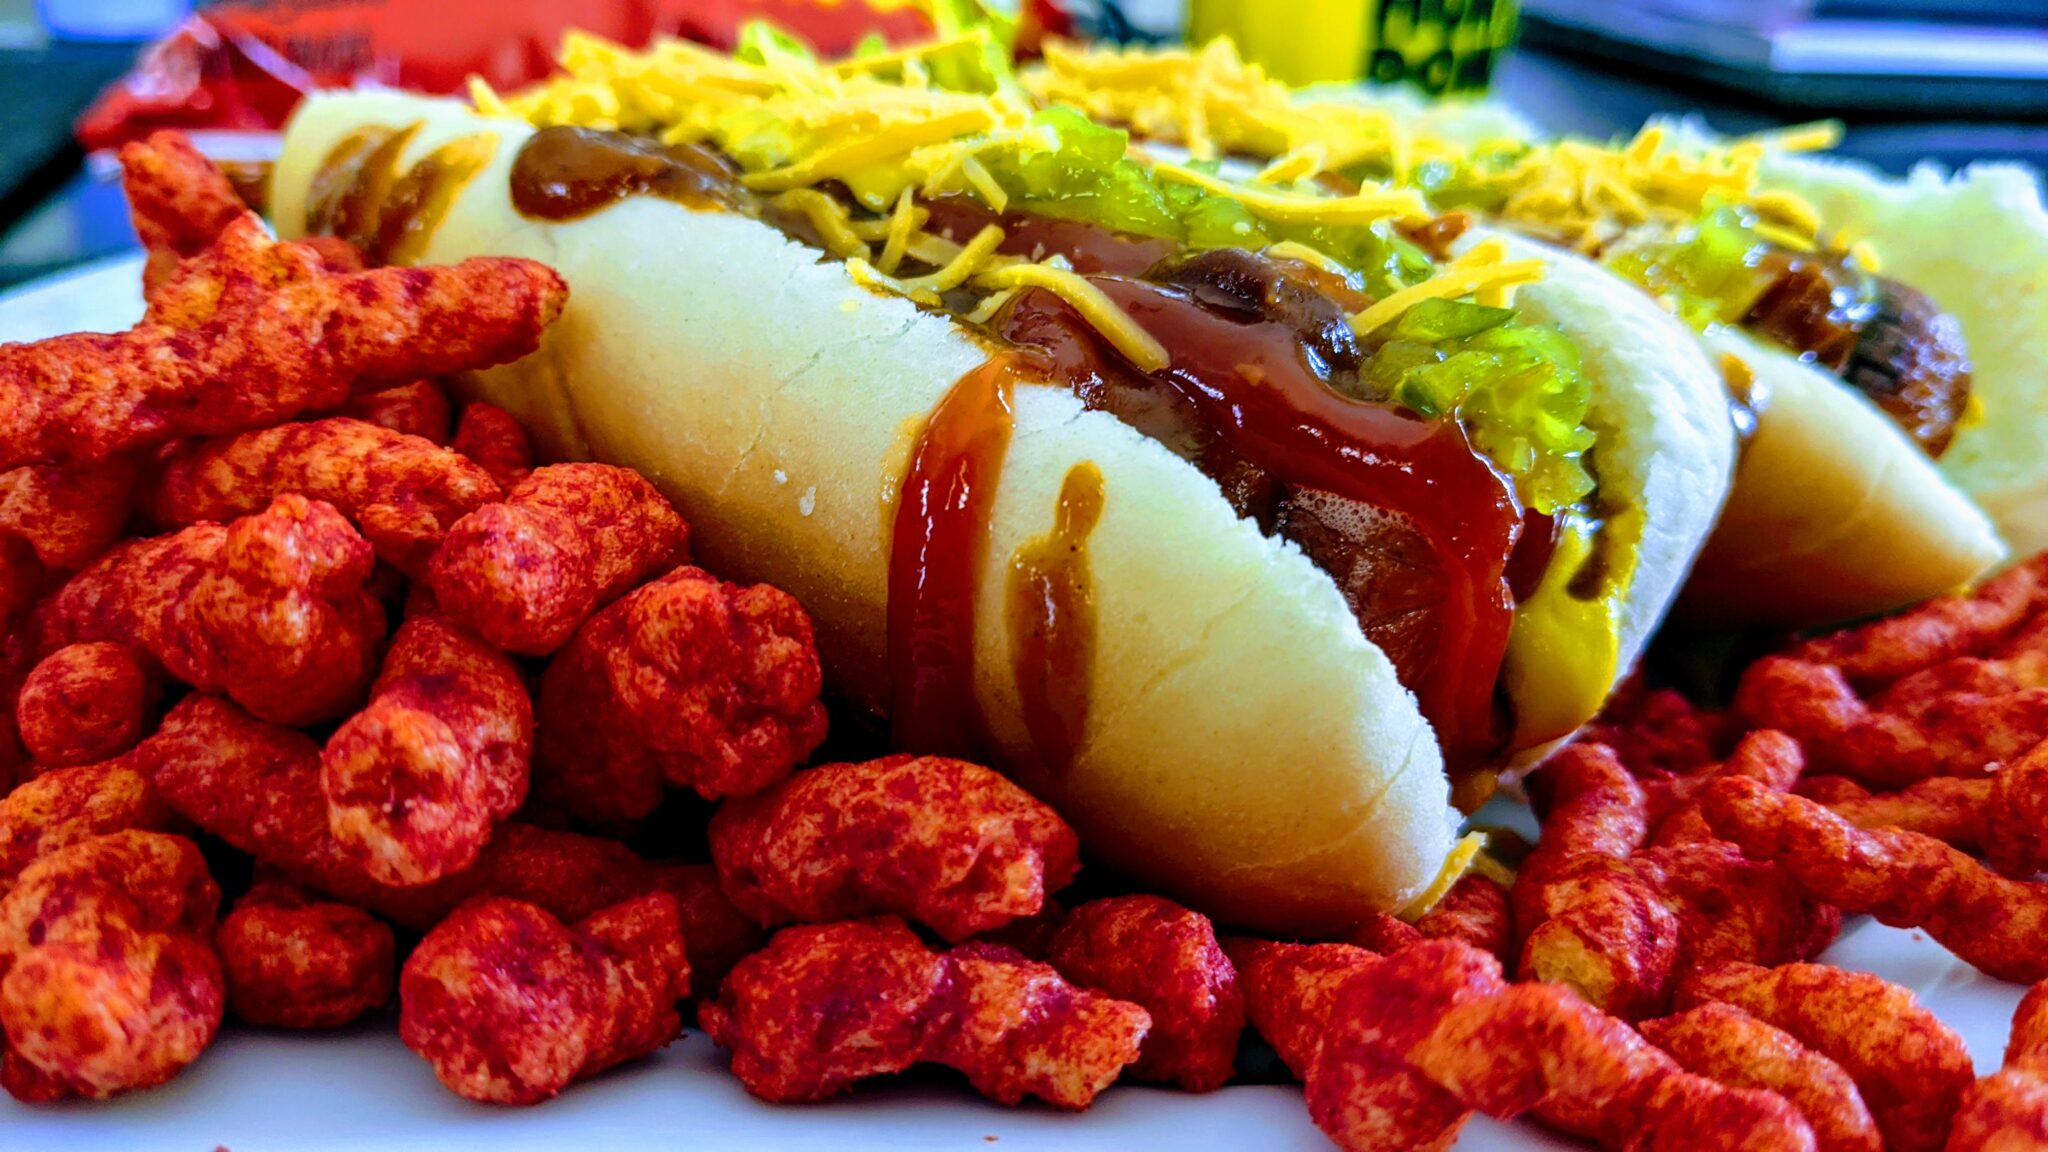 Natural casing dogs with Flamin' Hot Cheetos.